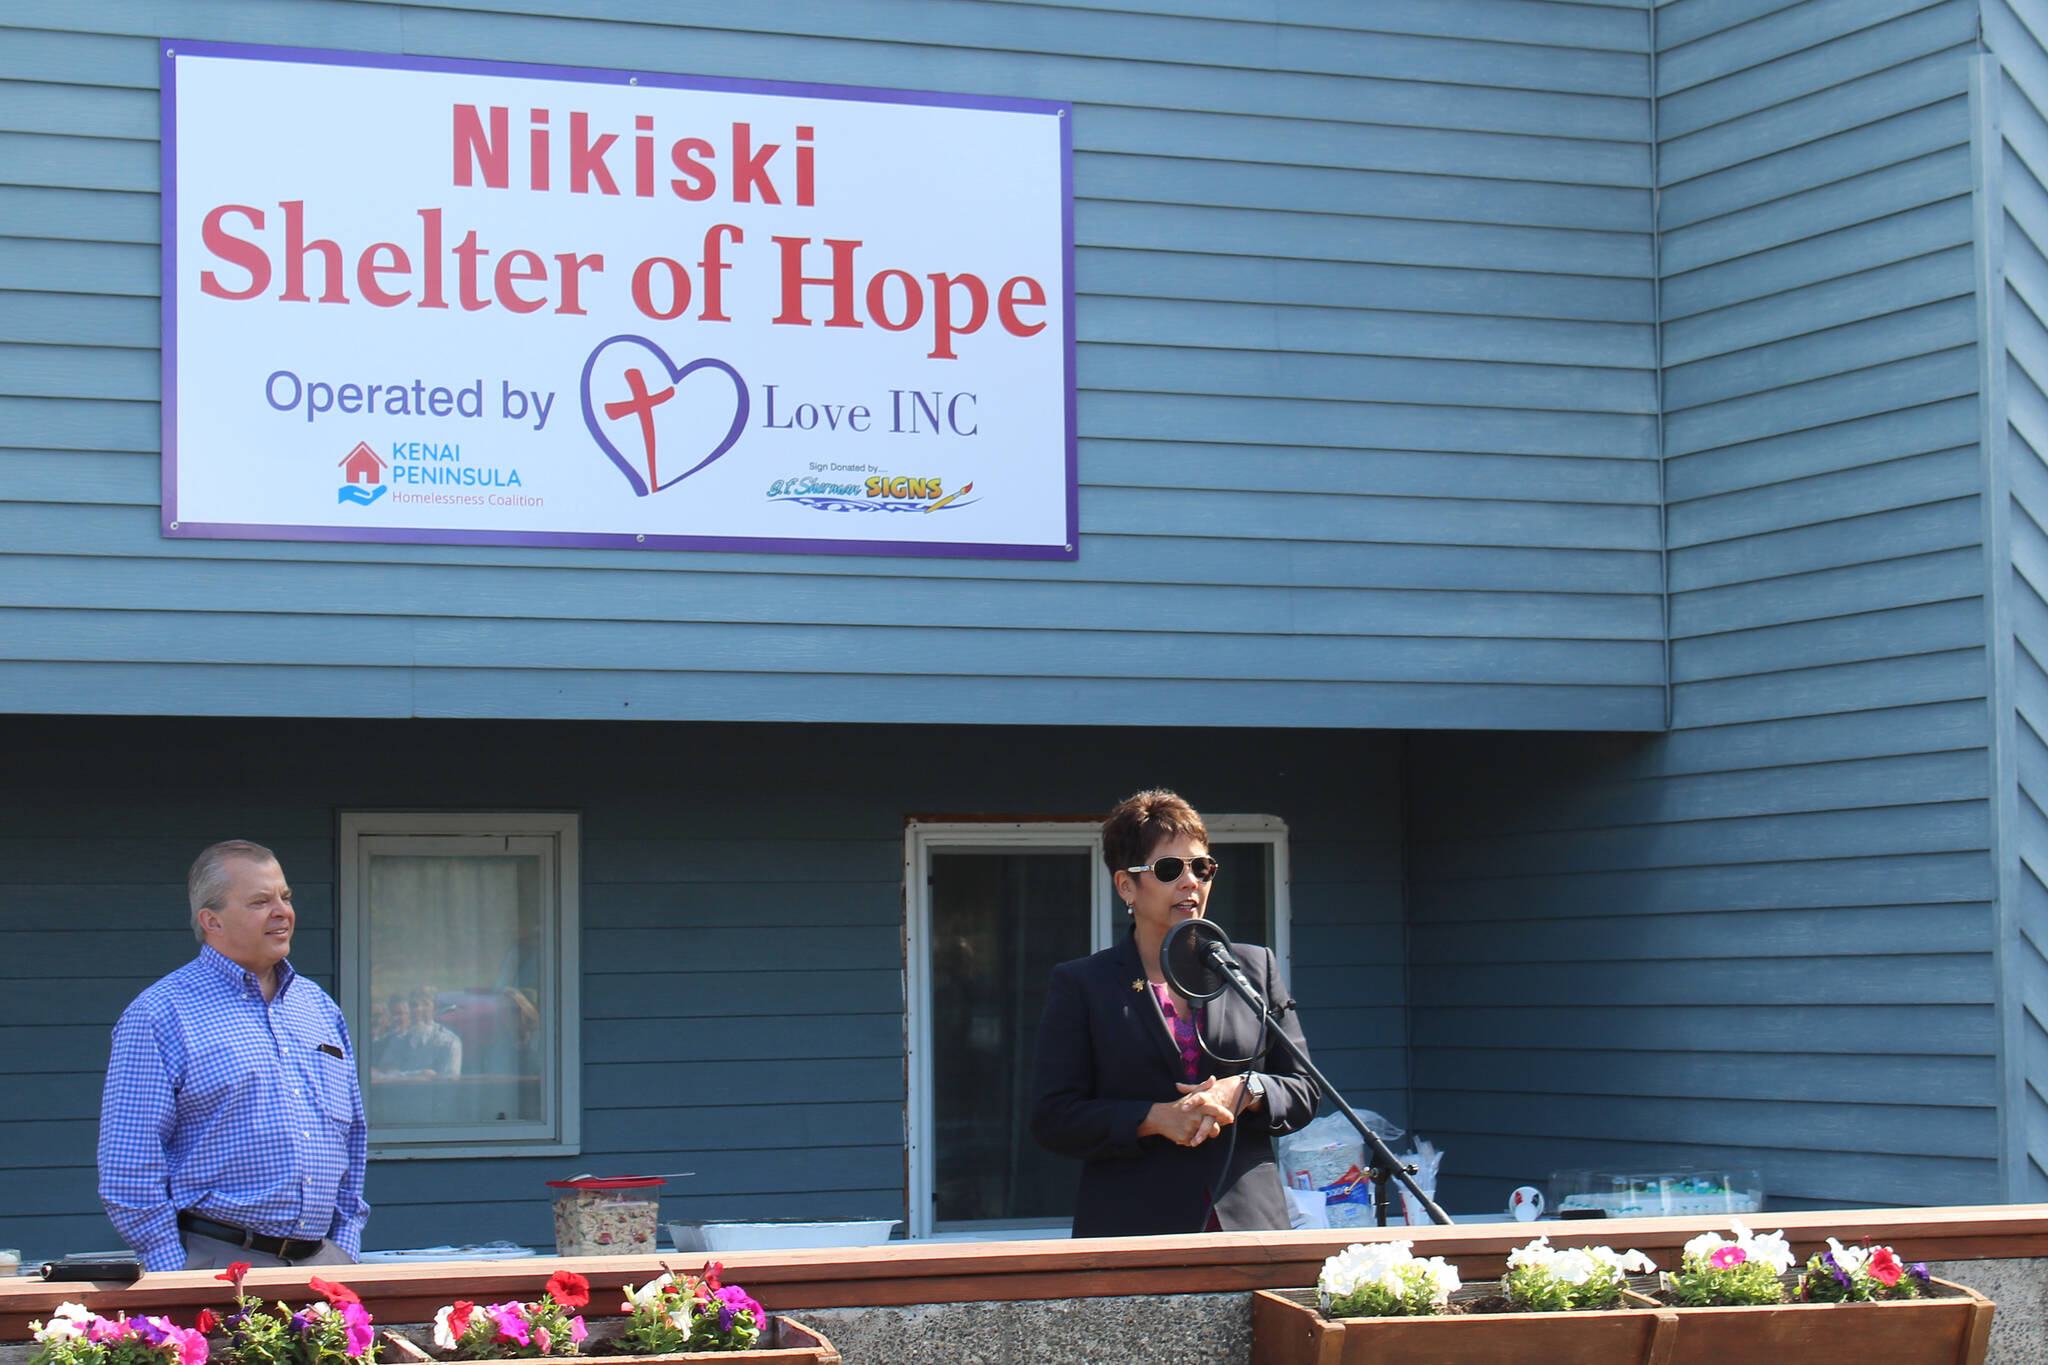 Cook Inlet Region, Inc. President and CEO Sophie Minich speaks during a ribbon cutting ceremony at the Nikiski Shelter of Hope on Friday, May 20, 2022, in Nikiski, Alaska. (Ashlyn O’Hara/Peninsula Clarion)